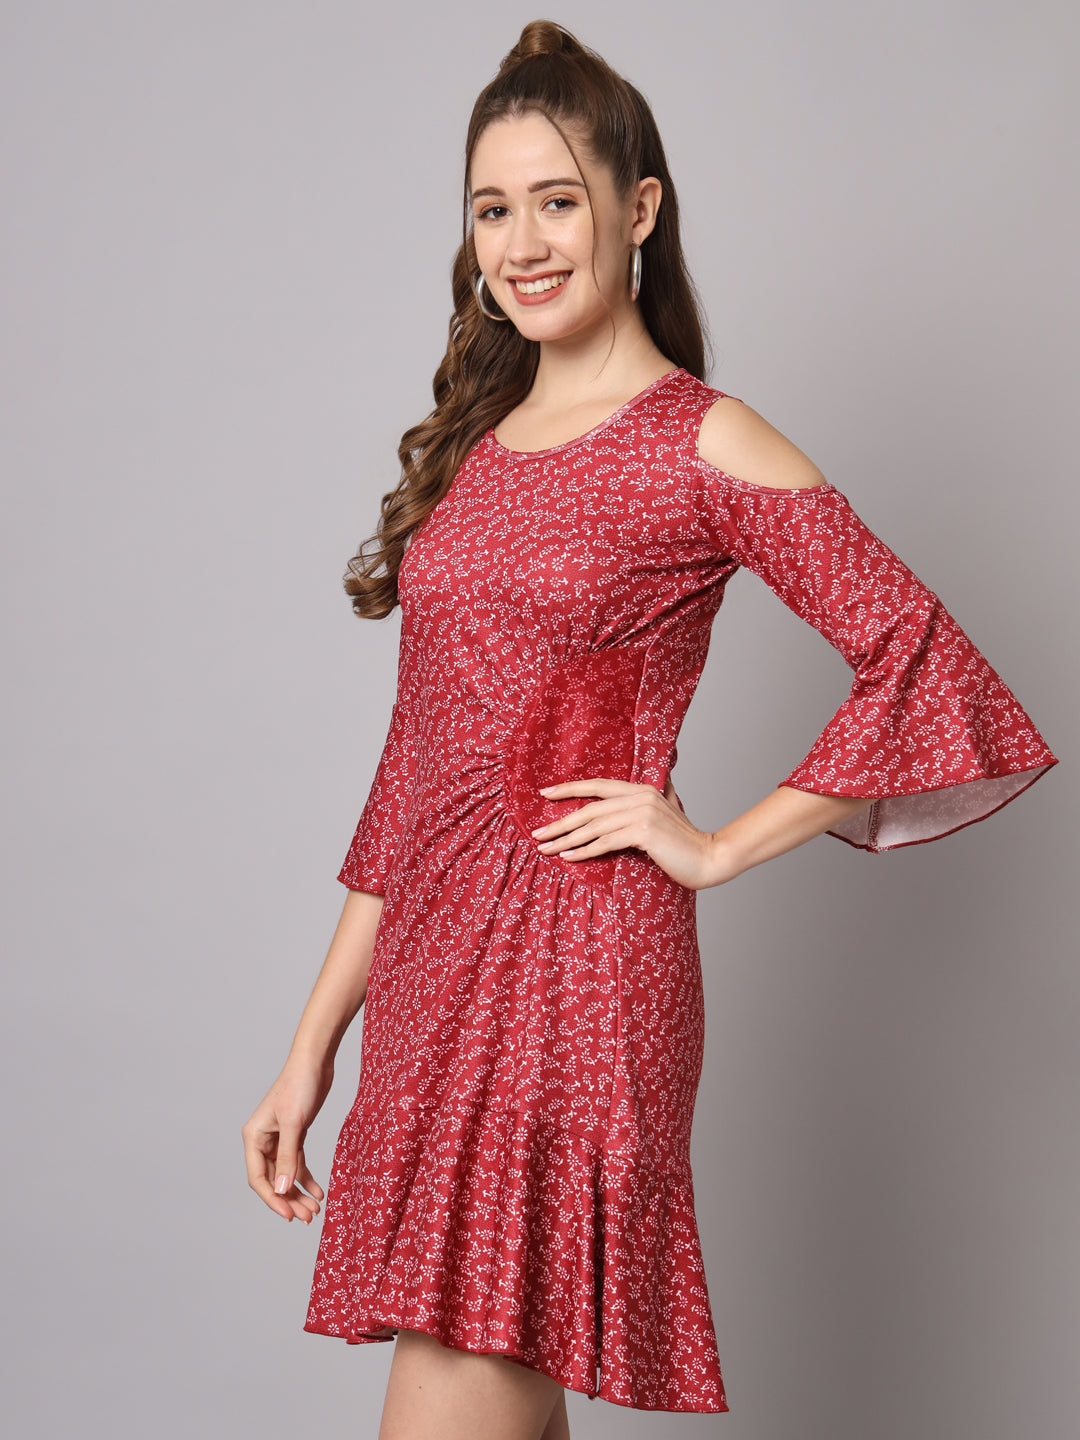 VredeVogel Women Fit and Flare Red Dress